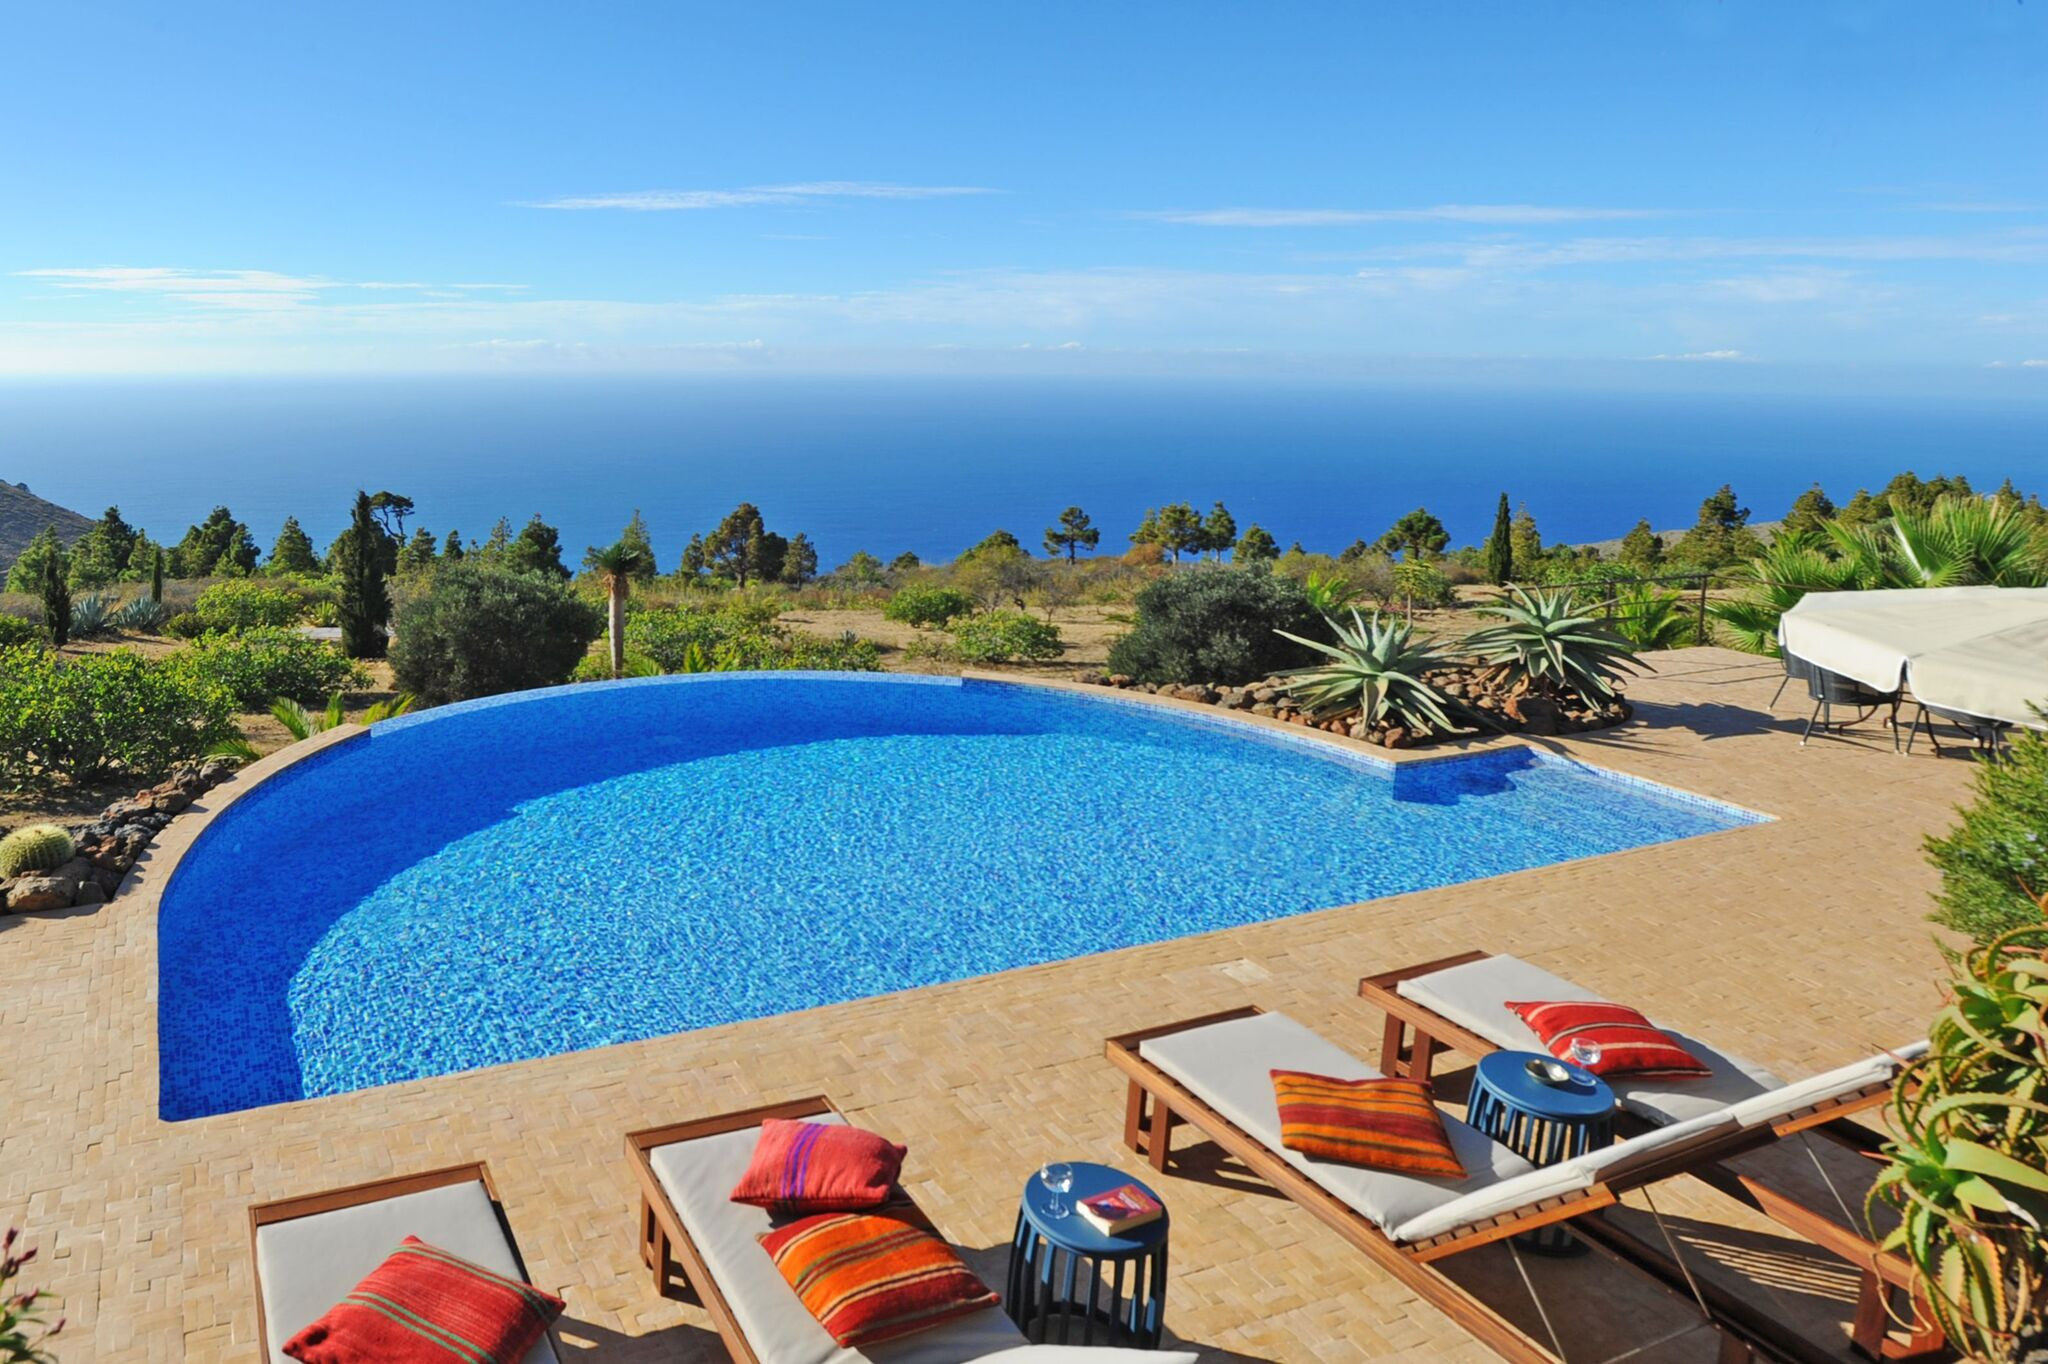 Villa Botanico is a luxurious holiday villa with garden, heated private pool and panoramic sea view in Puntagorda, La Palma